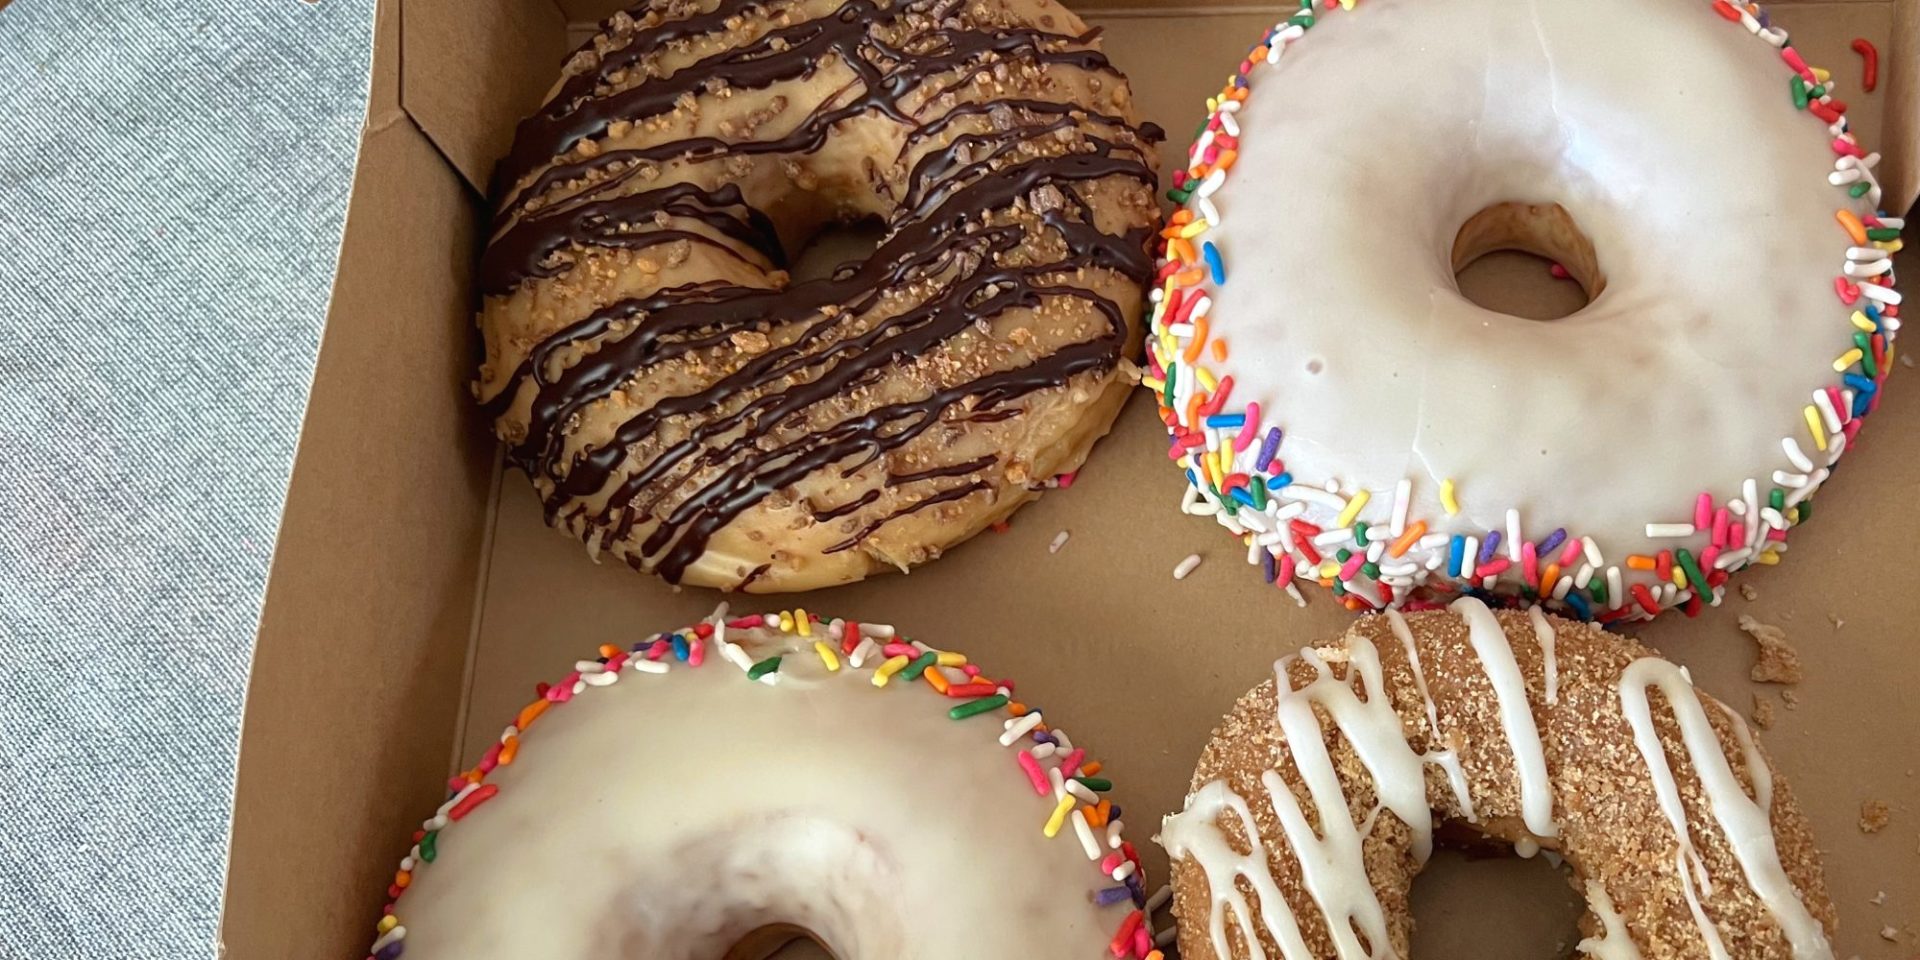 Four doughnuts in a brown box: one chocolate drizzled, two vanilla with rainbow sprinkles along the circumference, and a white chocolate drizzled coffee cake doughnut.